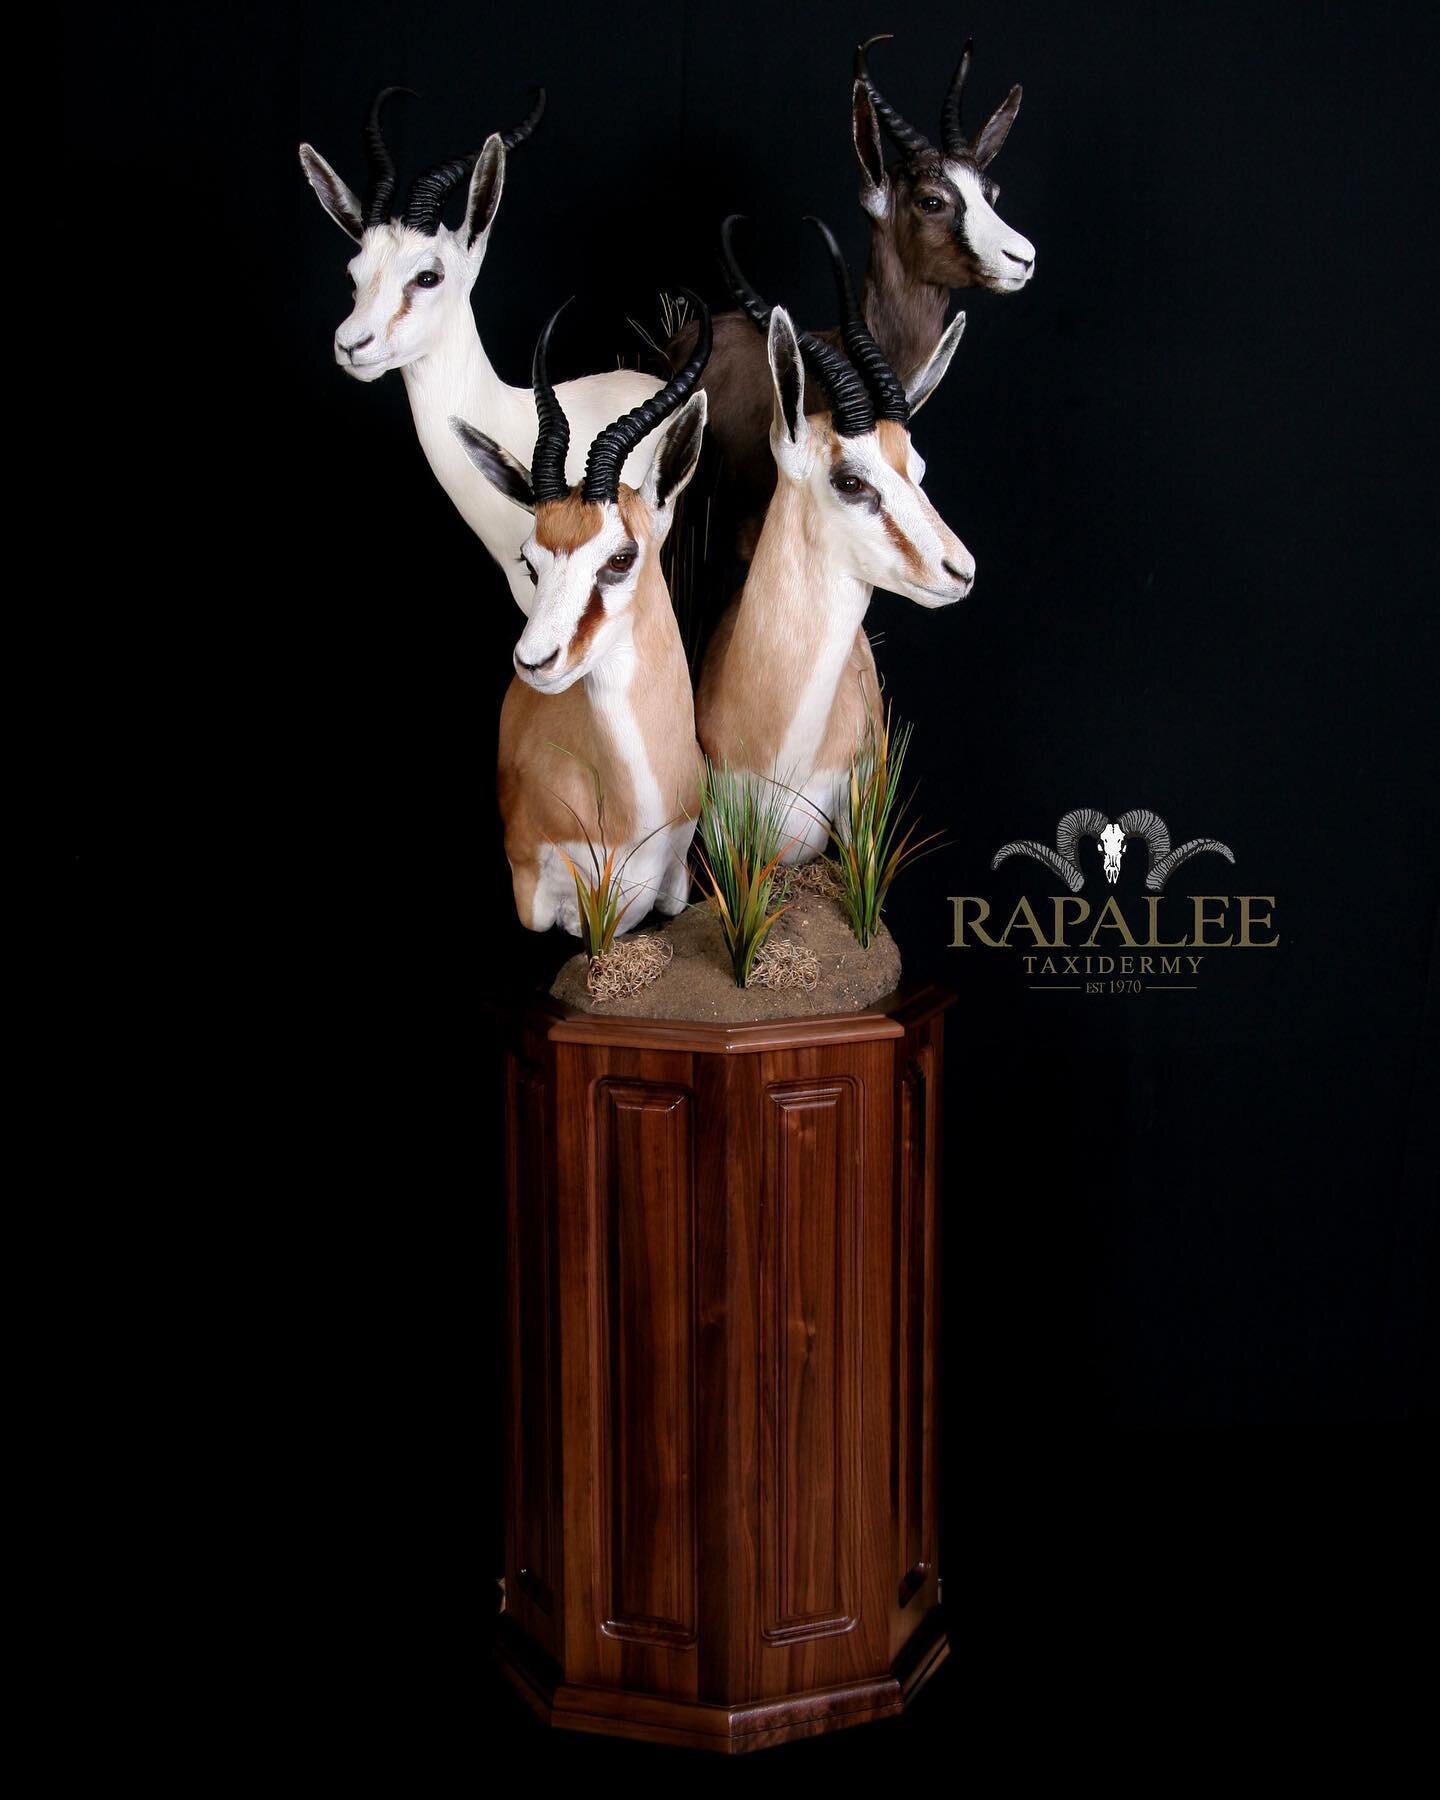 A classic walnut pedestal is a great way to save space and show off the beauty of the four color phases of springbok. Common, Copper, Black and White. #rapaleetaxidermy #worldclasstaxidermy #virginiataxidermy #virginiataxidermist #pedestalmount #afri